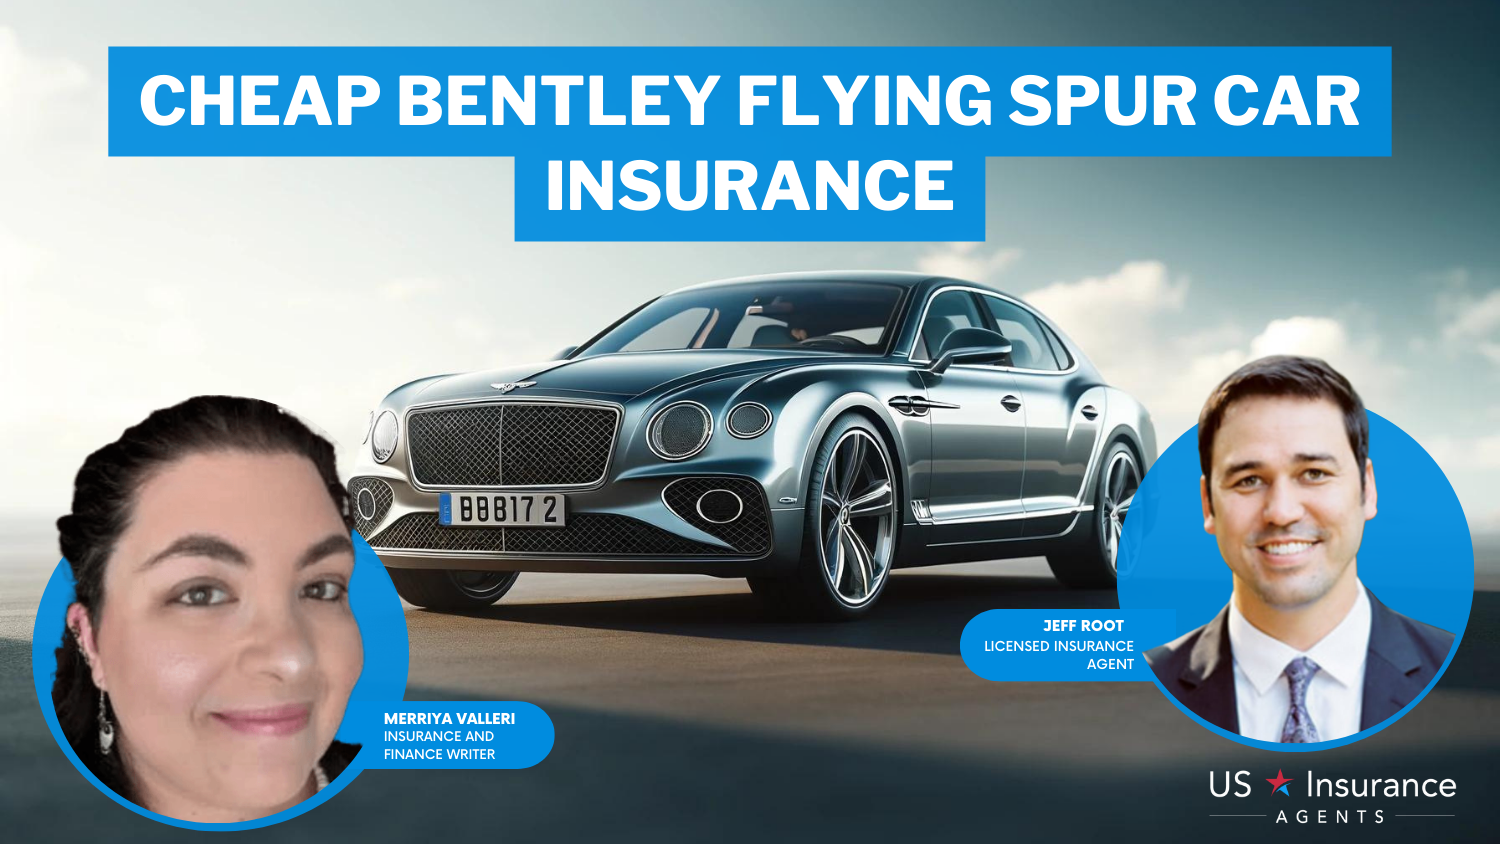 Allstate, Travelers and State Farm: Cheap Bentley Flying Spur Car Insurance